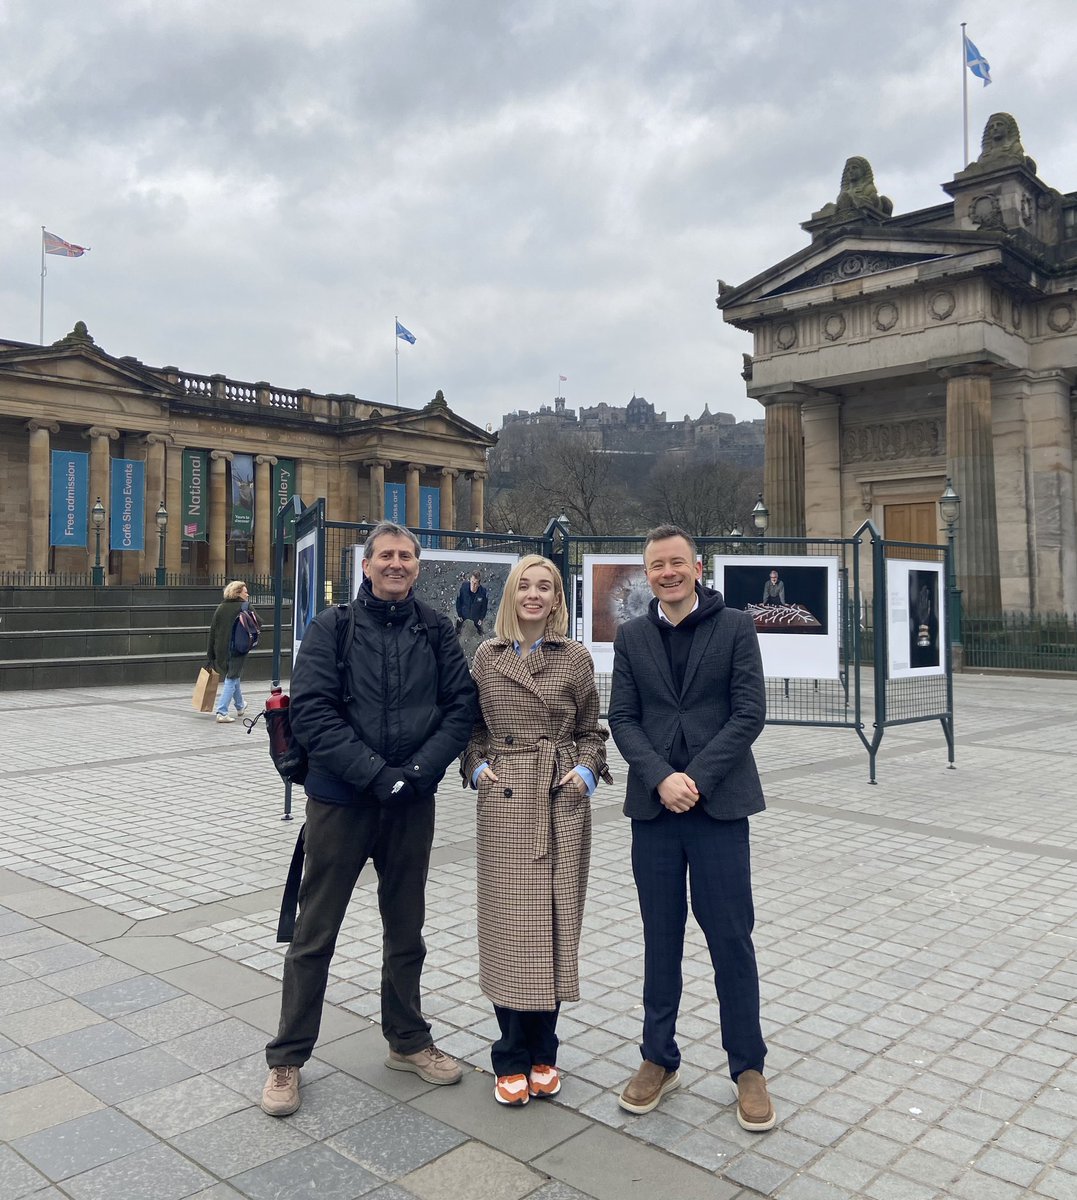 Our Founder @ScottishCossack joined @MaxA_Photo & @EdSciFest on @STVNews to discuss the importance of protecting low-Earth orbit🛰🌎 In Edinburgh during the Science Festival? Visit the free, open-air 'Our Fragile Space' exhibition on The Mound! #SpaceSustainability @RoyalSocEd